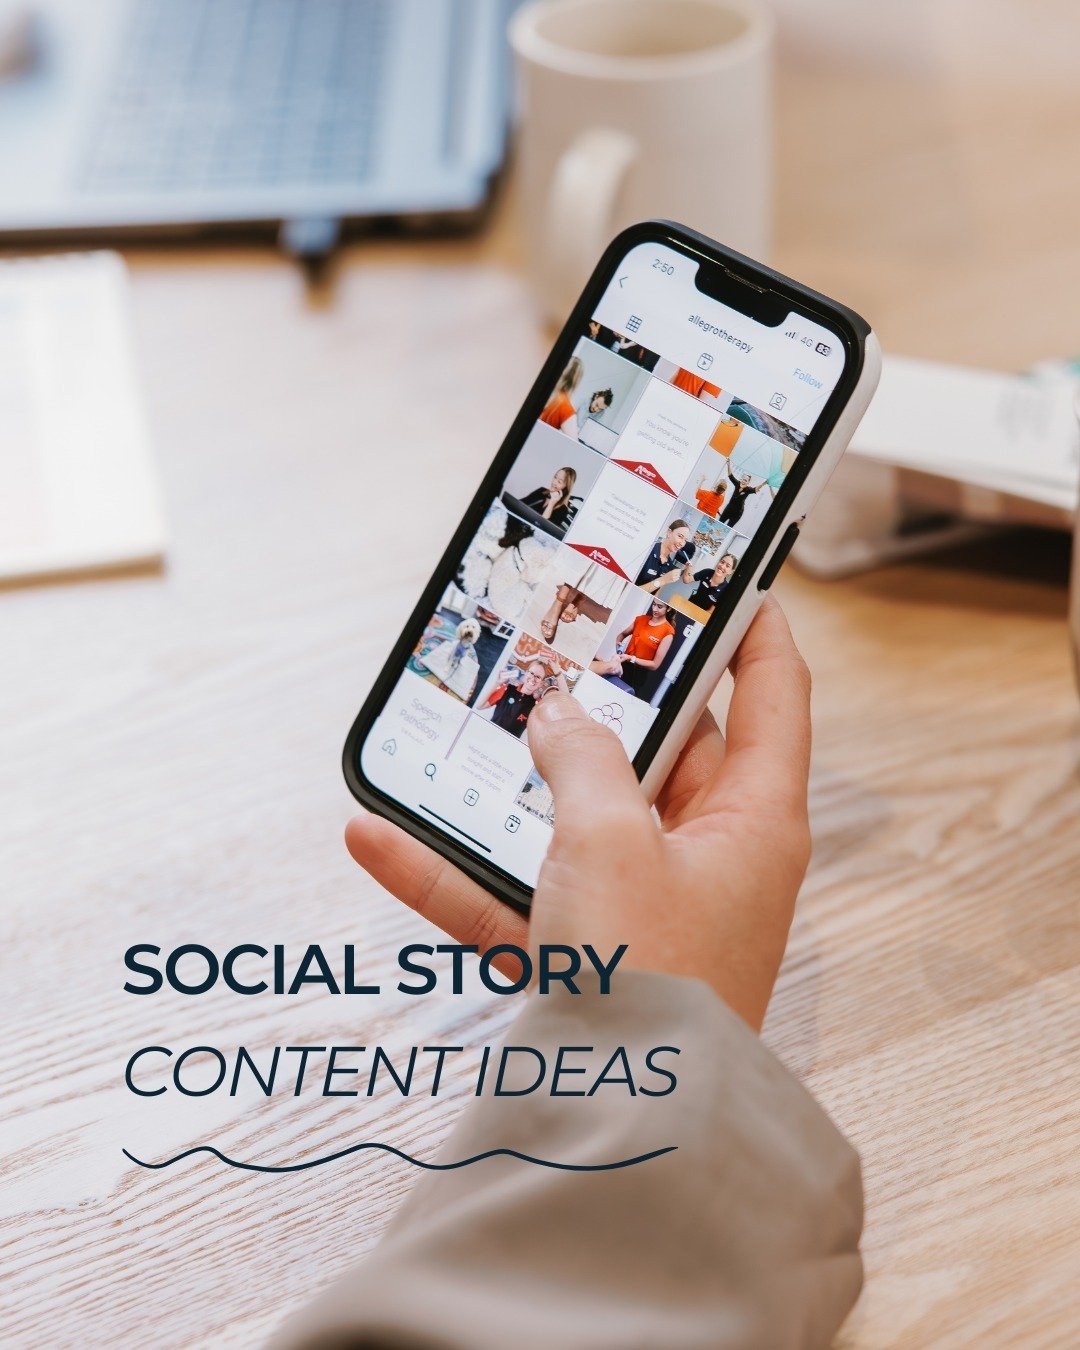 Need some social media story content ideas? We've got you covered!
Save this post for a burst of creativity, and let the storytelling begin 🤳🏼